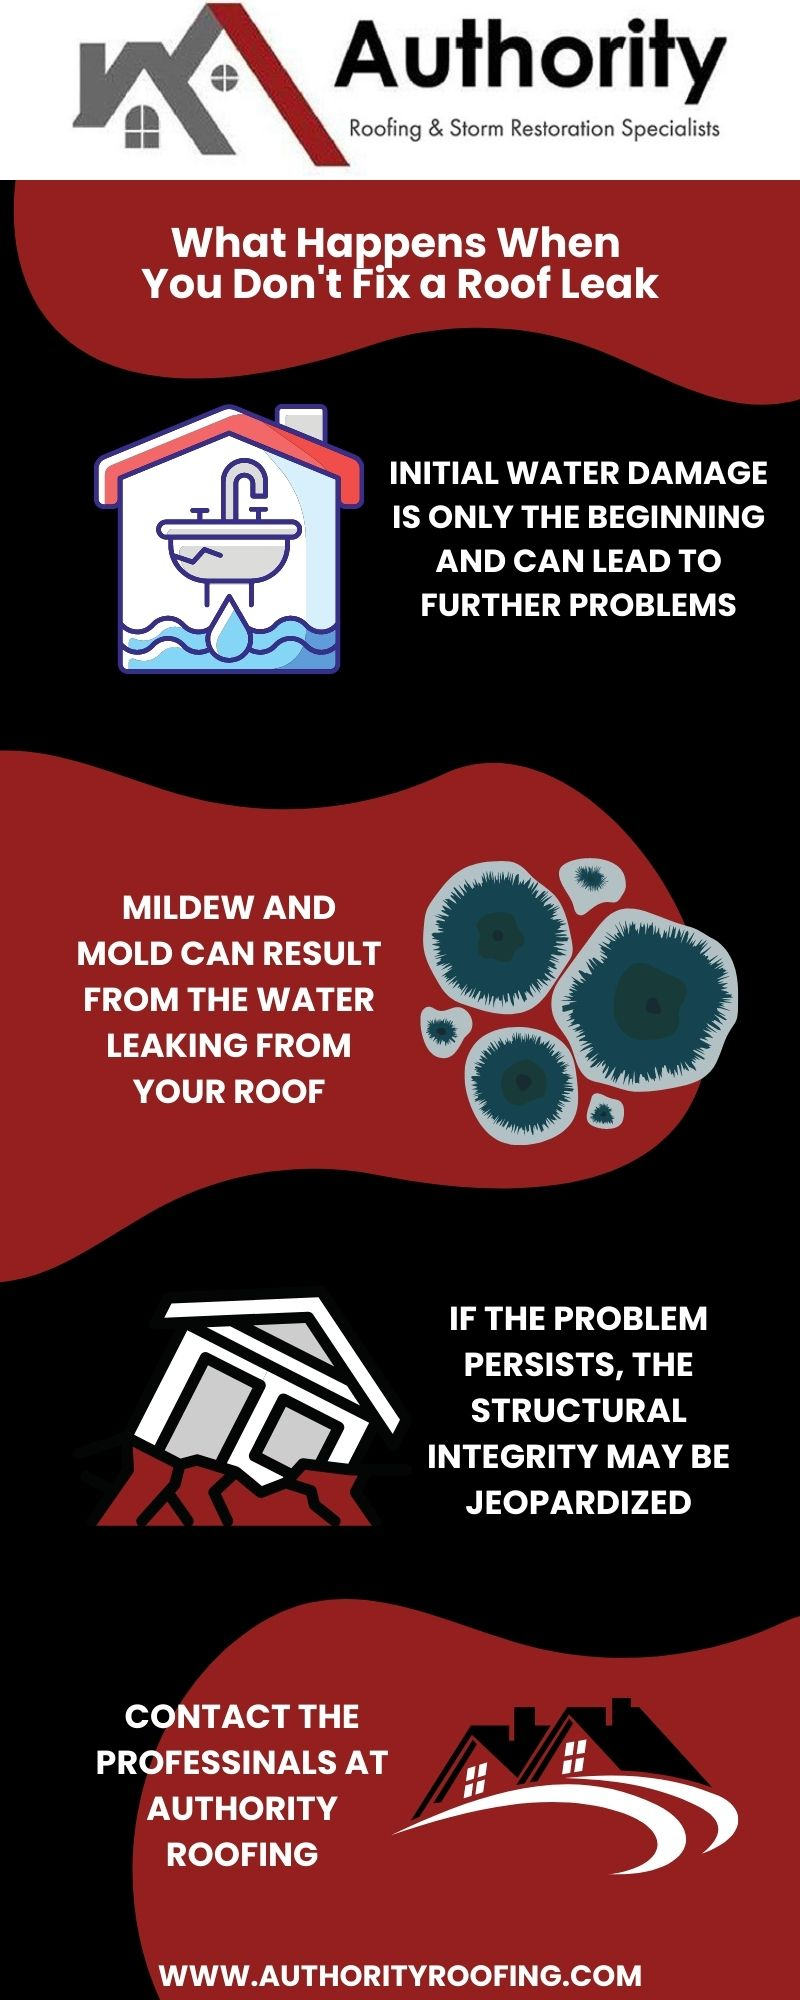 M1685 - Authority Roofing - Infographic.jpg